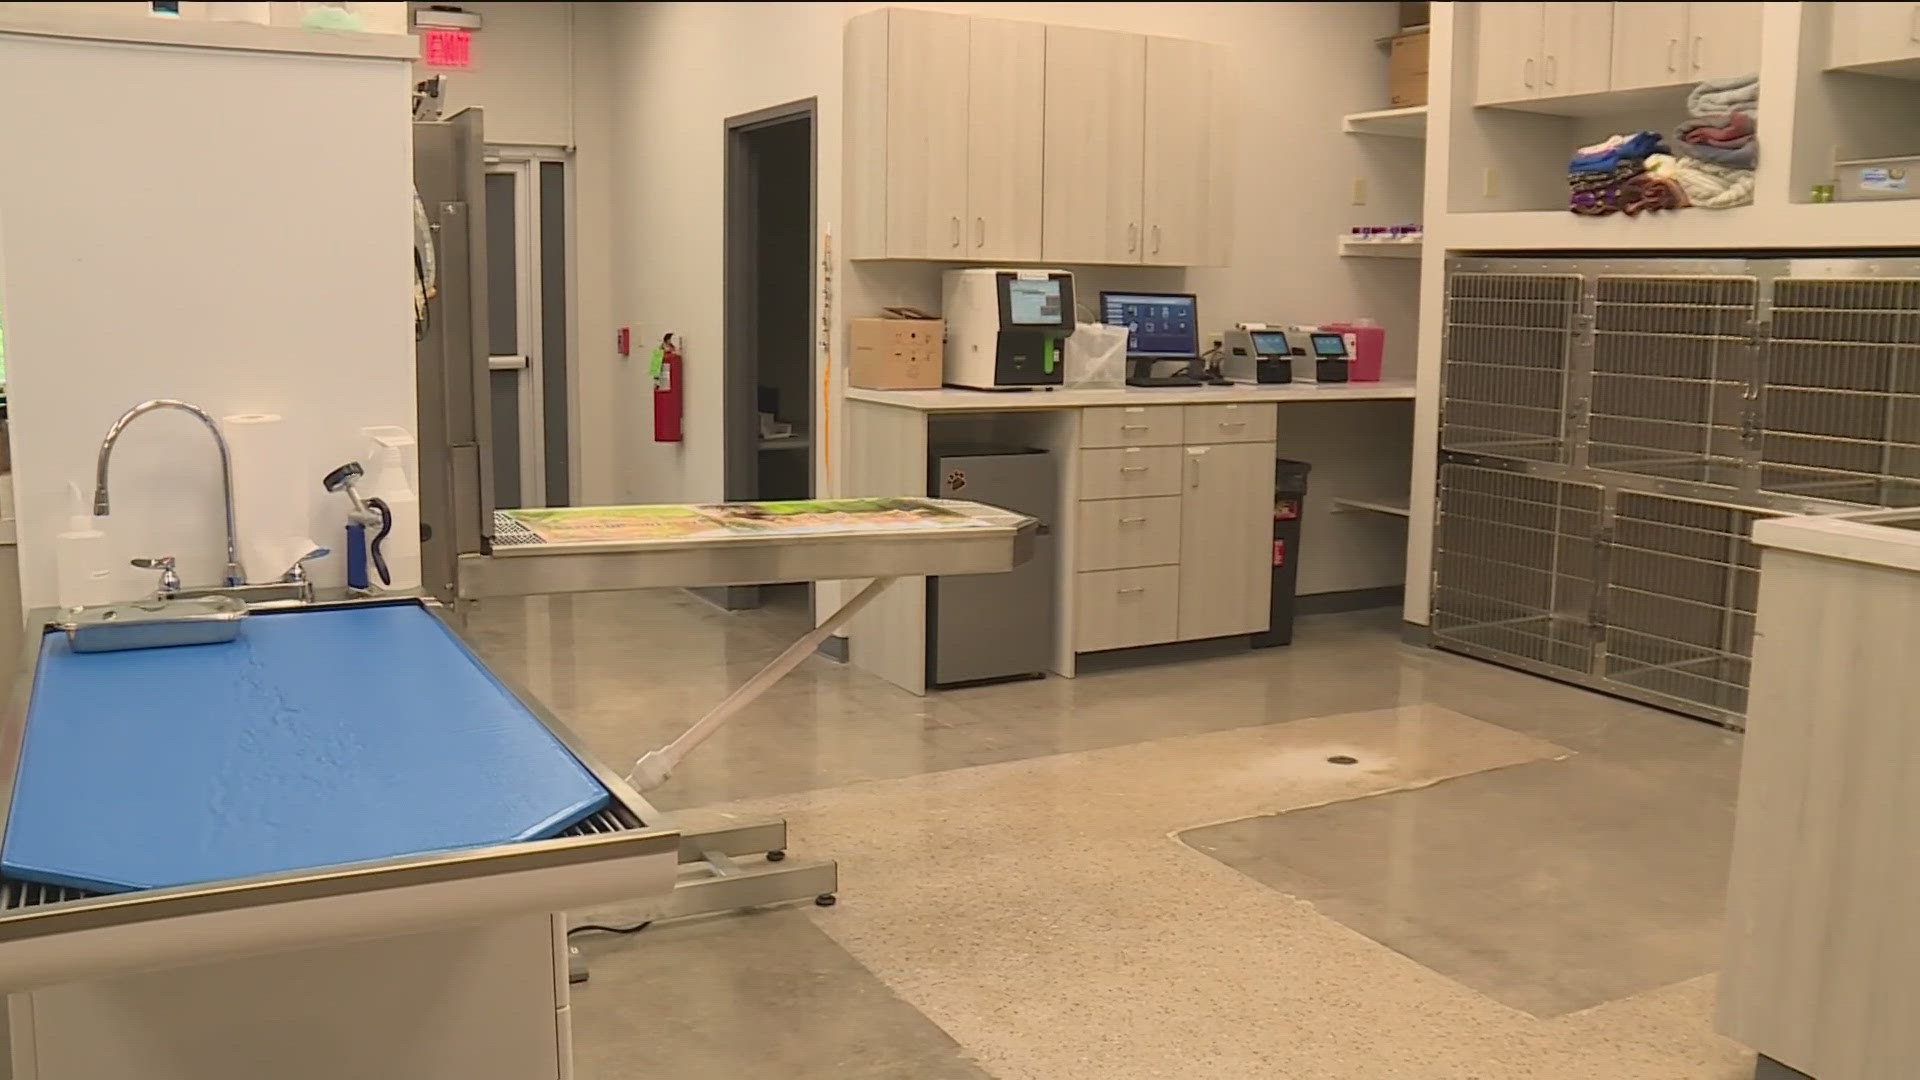 LocalVet Urgent Care opened in Fayetteville last month after seeing a need in the community.